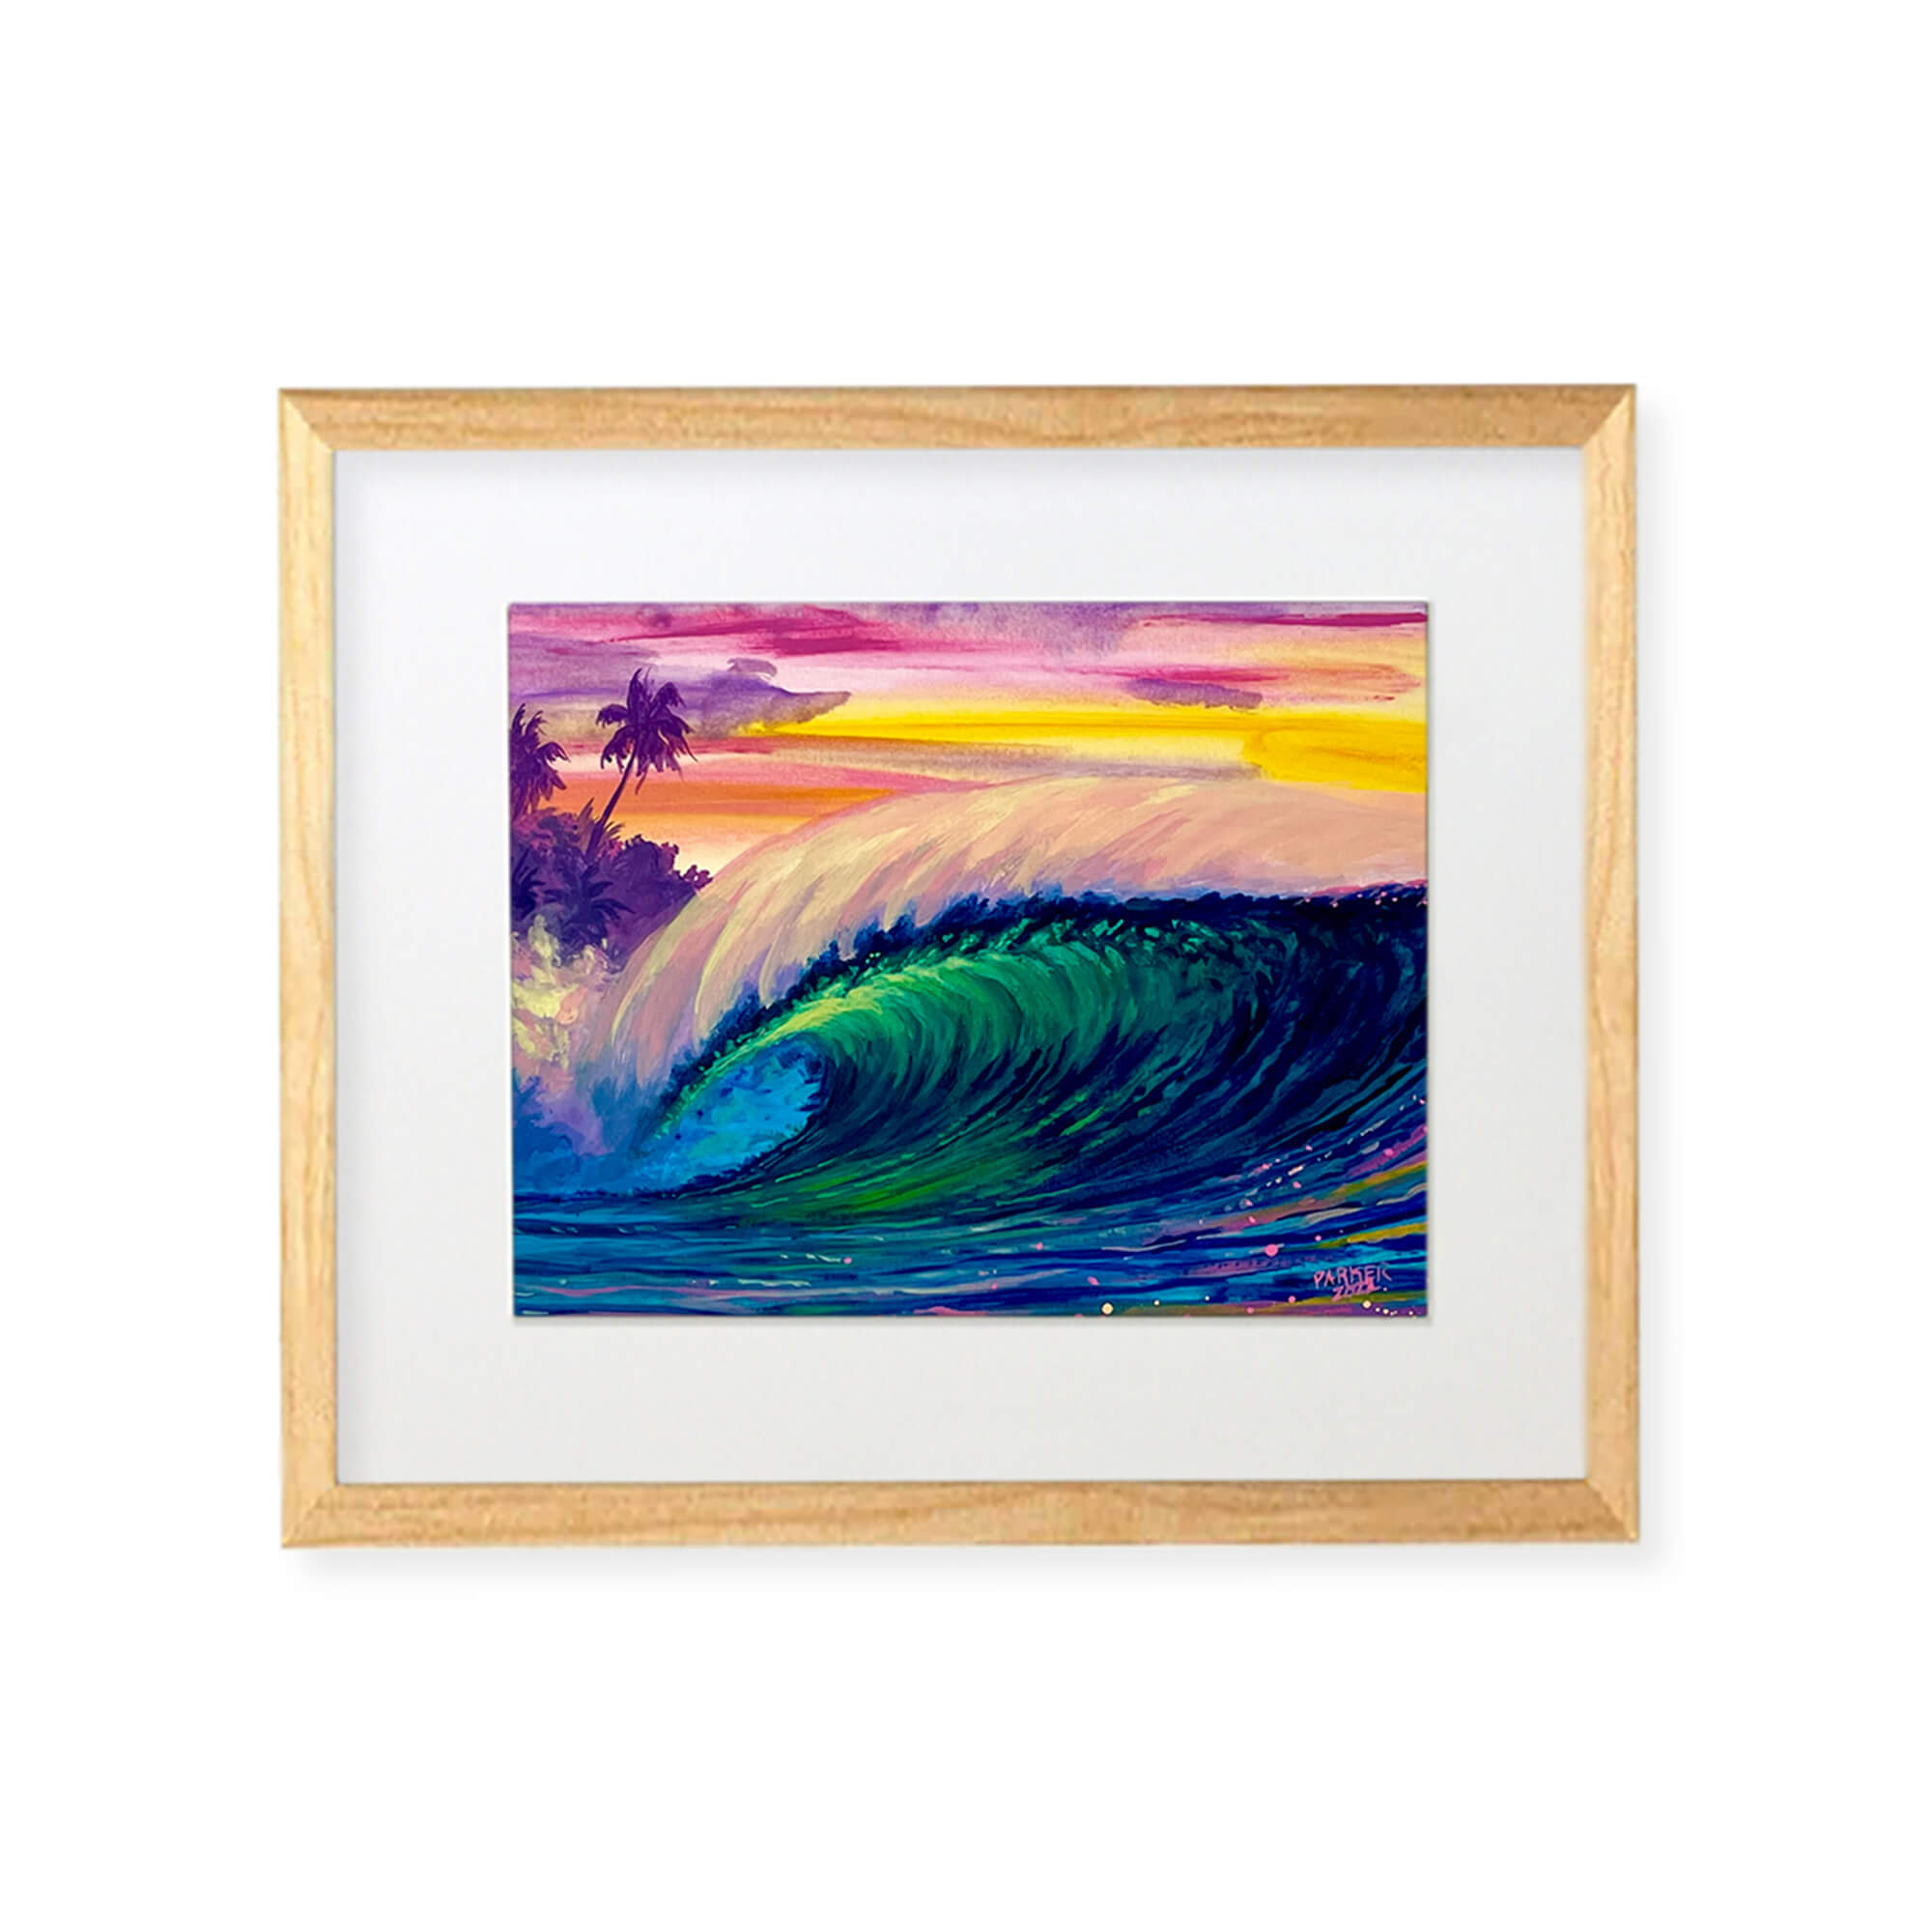 A framed original painting featuring a large multi-hued crashing wave and vibrant colorful sky by Maui artist Patrick Parker